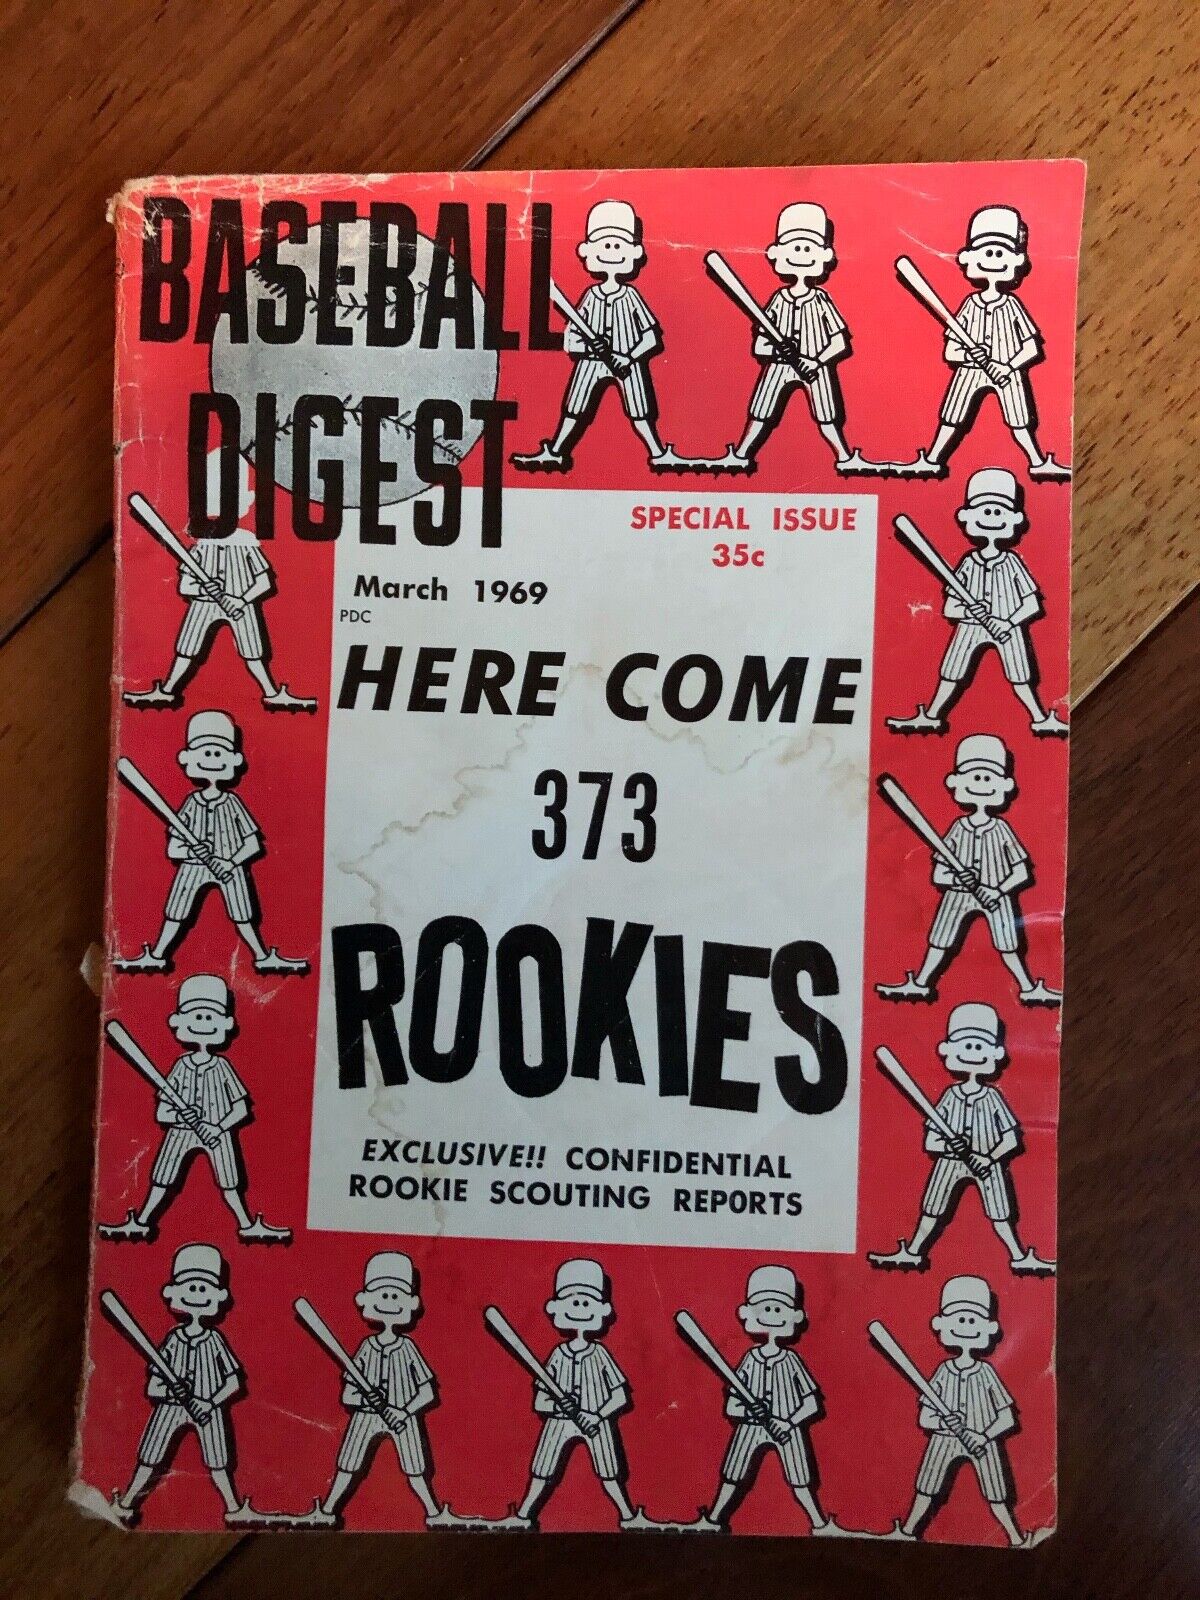 VINTAGE 1969 BASEBALL DIGEST SPECIAL ISSUE, 373 ROOKIES, SCOUTING REPORTS